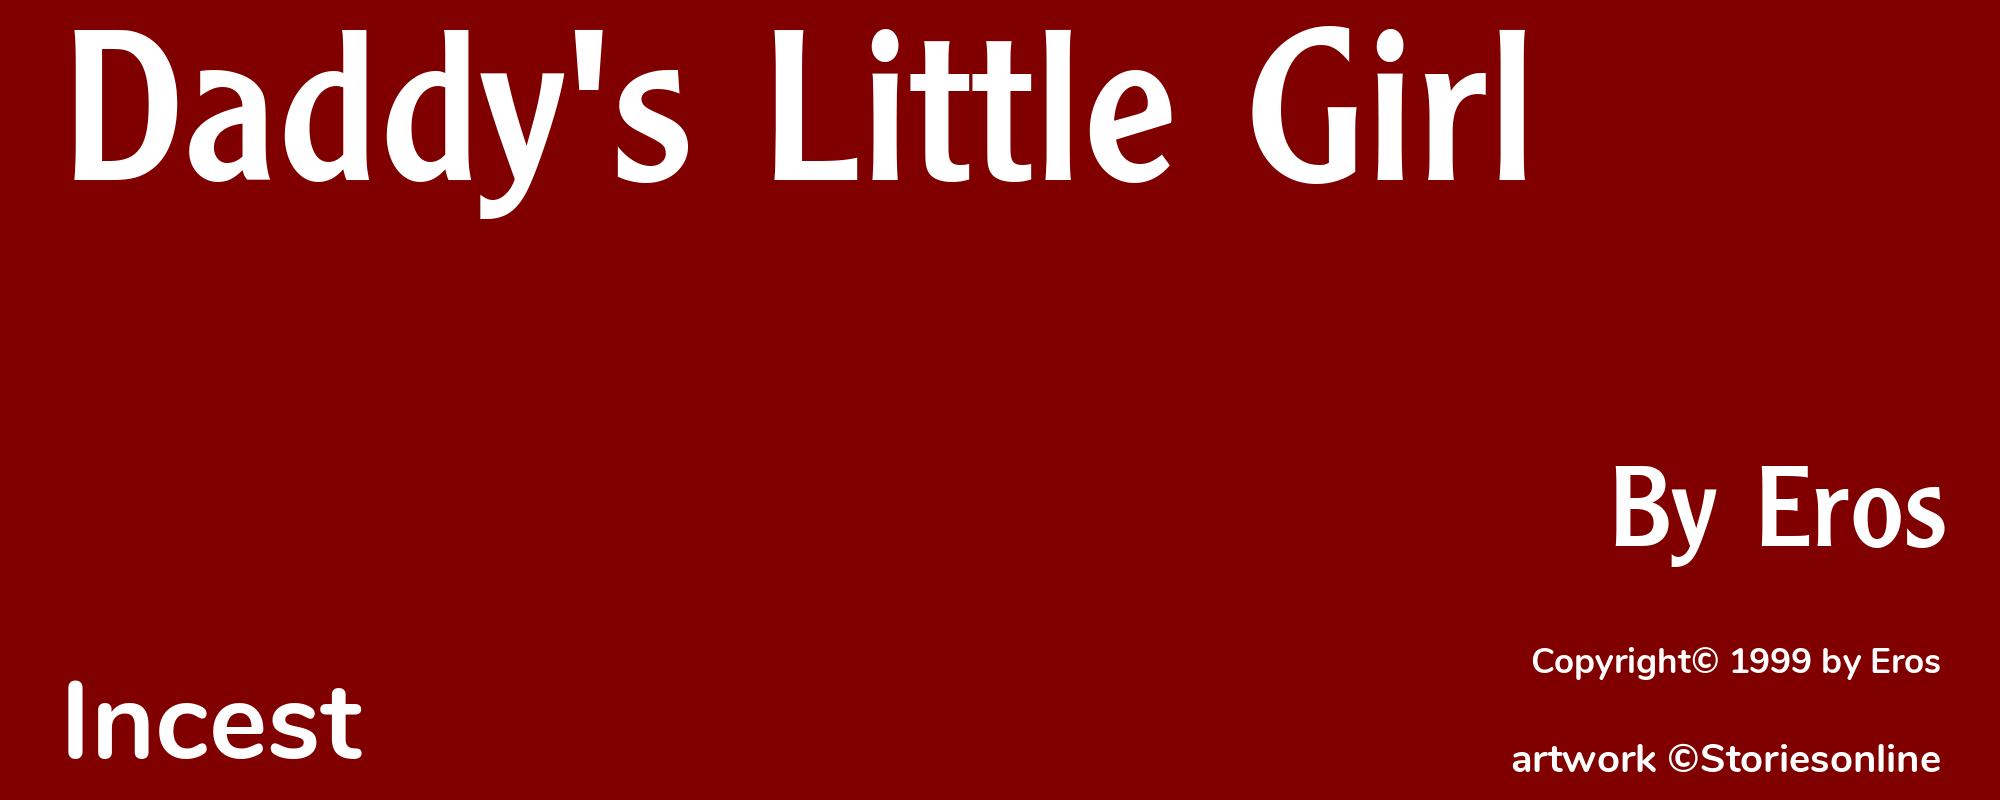 Daddy's Little Girl - Cover